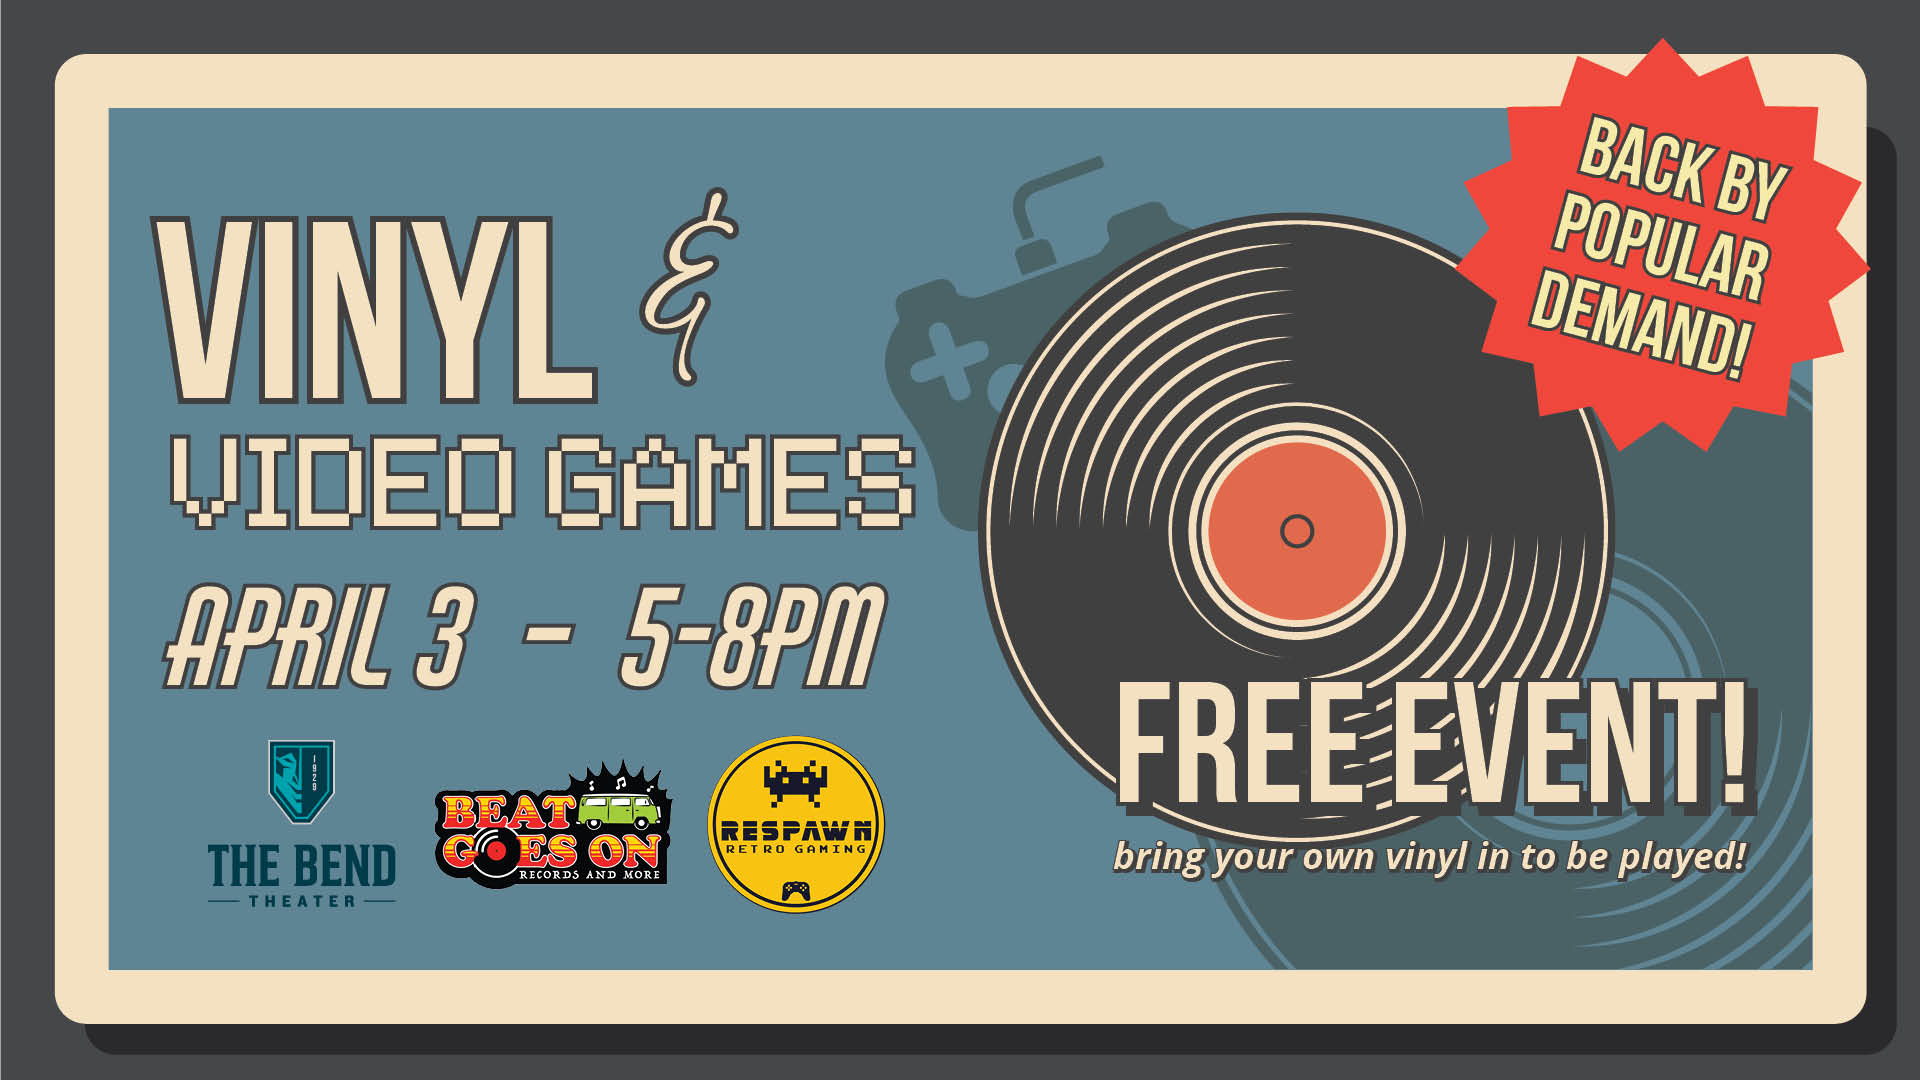 Vinyl & Video Games at The Bend Theater